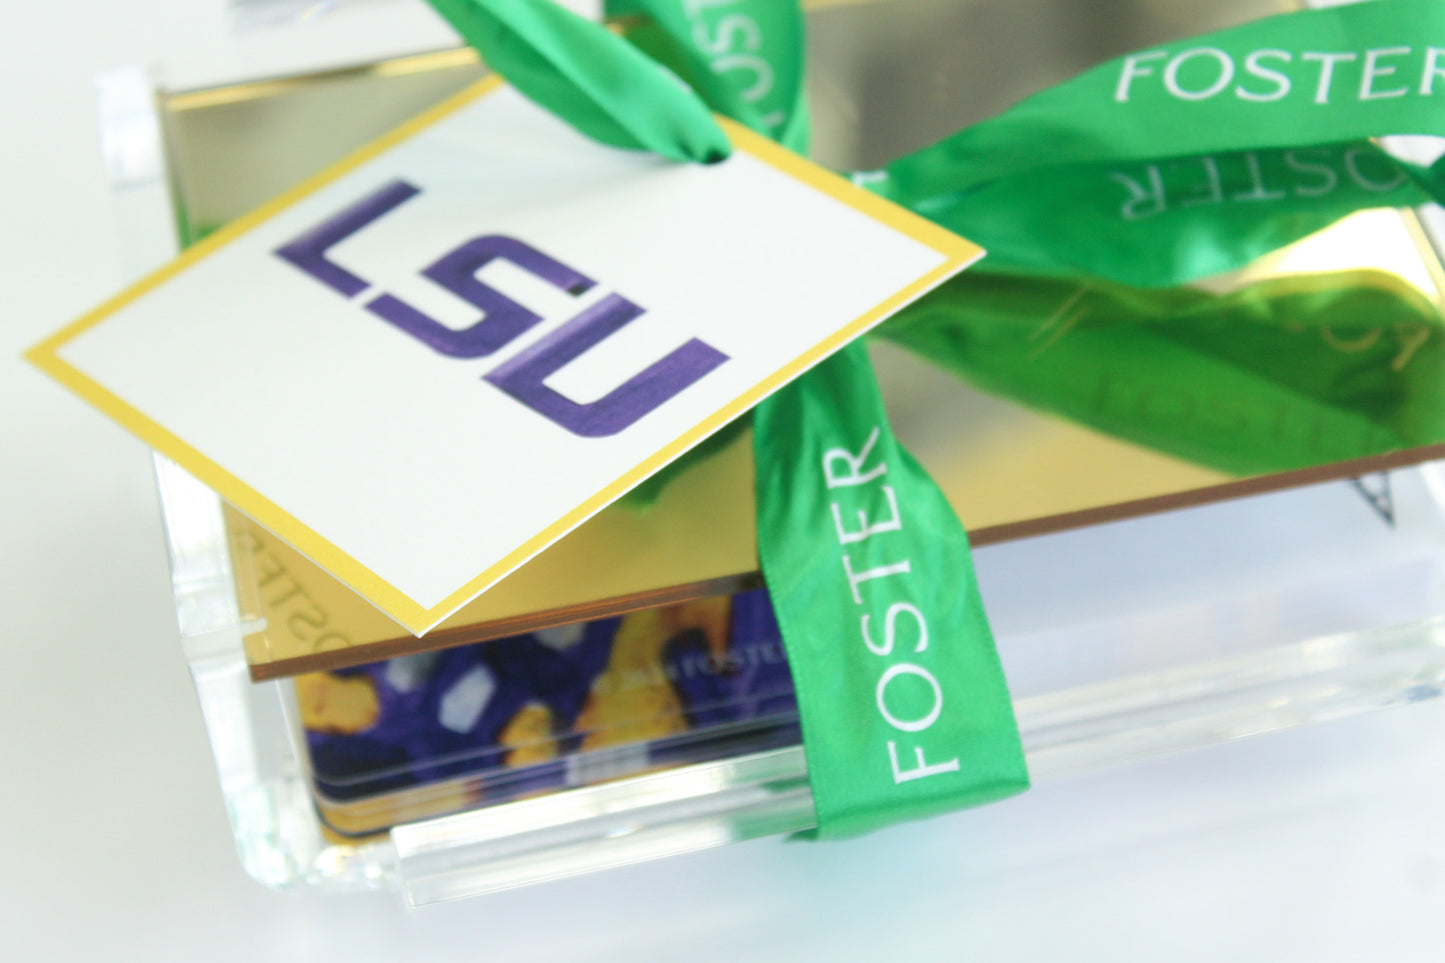 LSI logo gift tags by FOSTER. Perfect for LSU graduations.